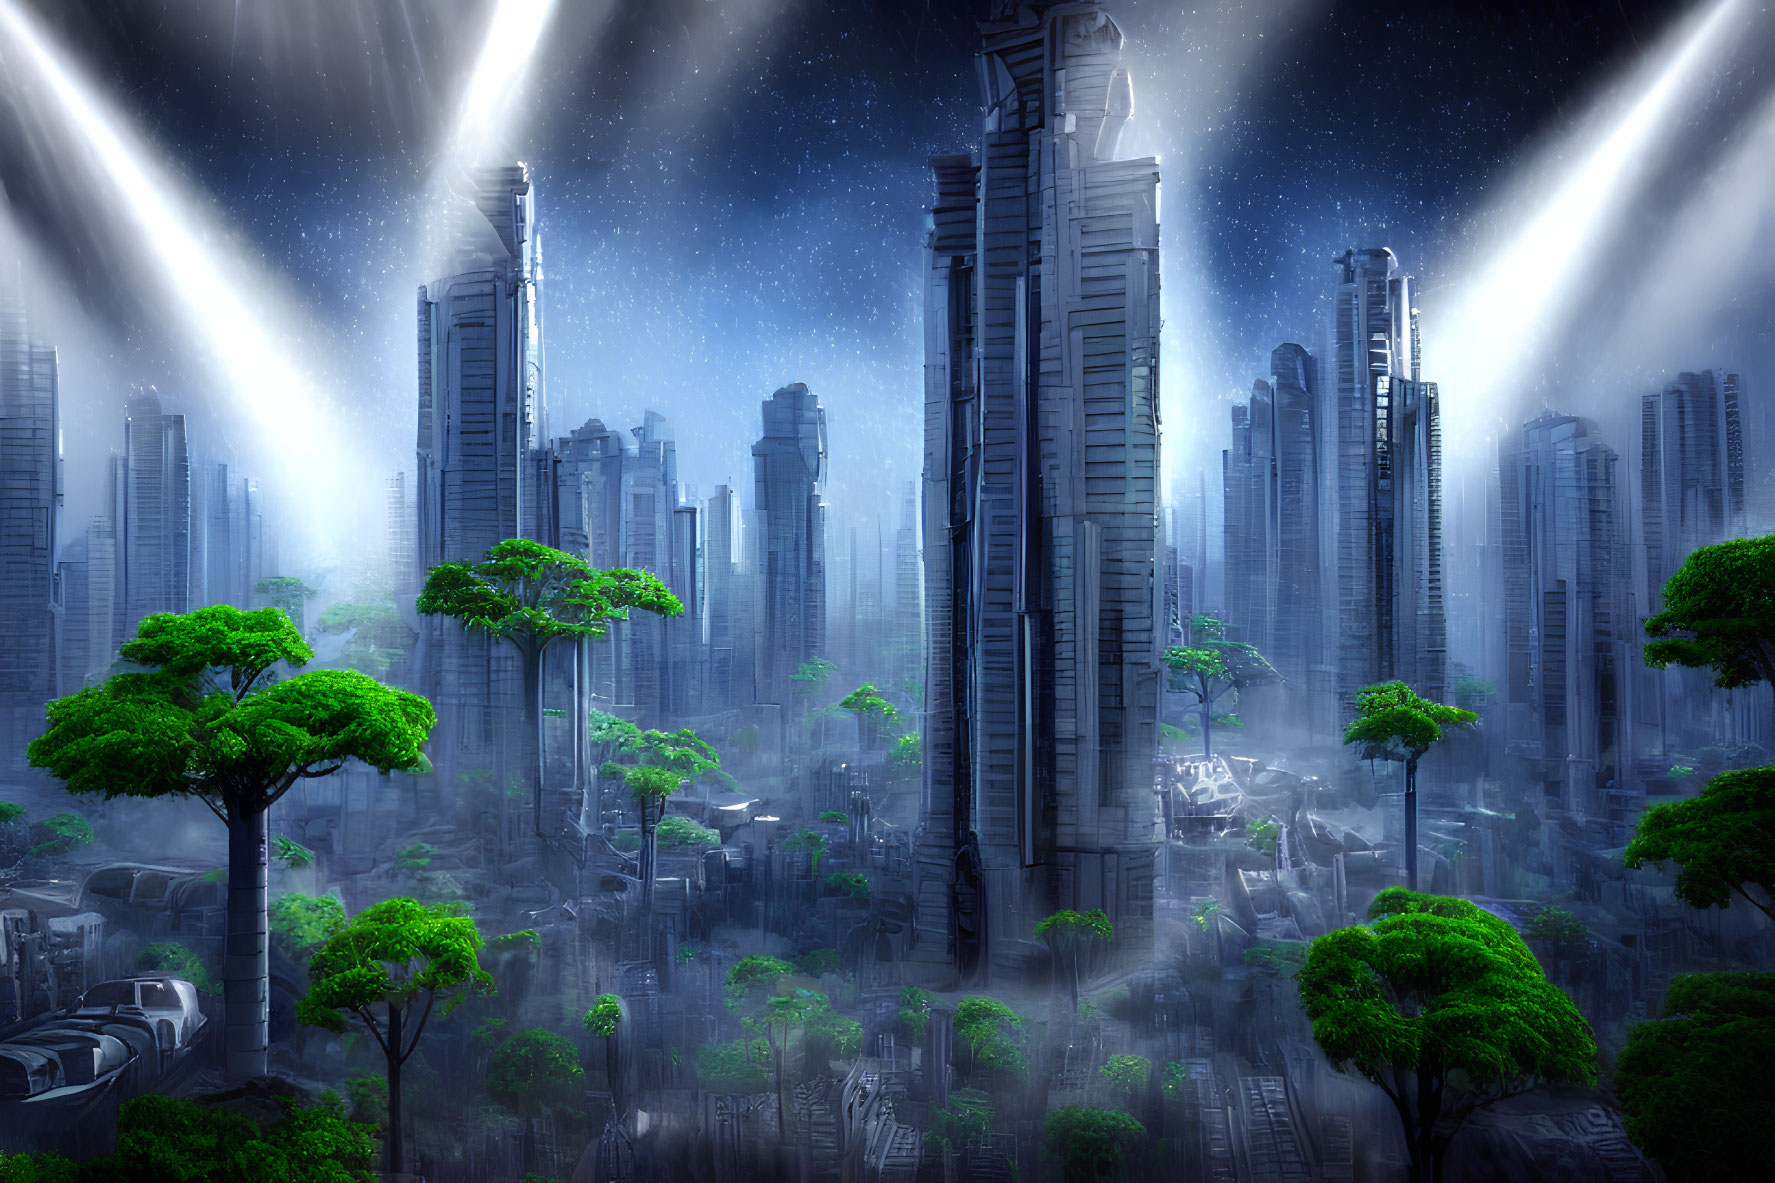 Futuristic cityscape with towering skyscrapers and lush greenery under a starry sky